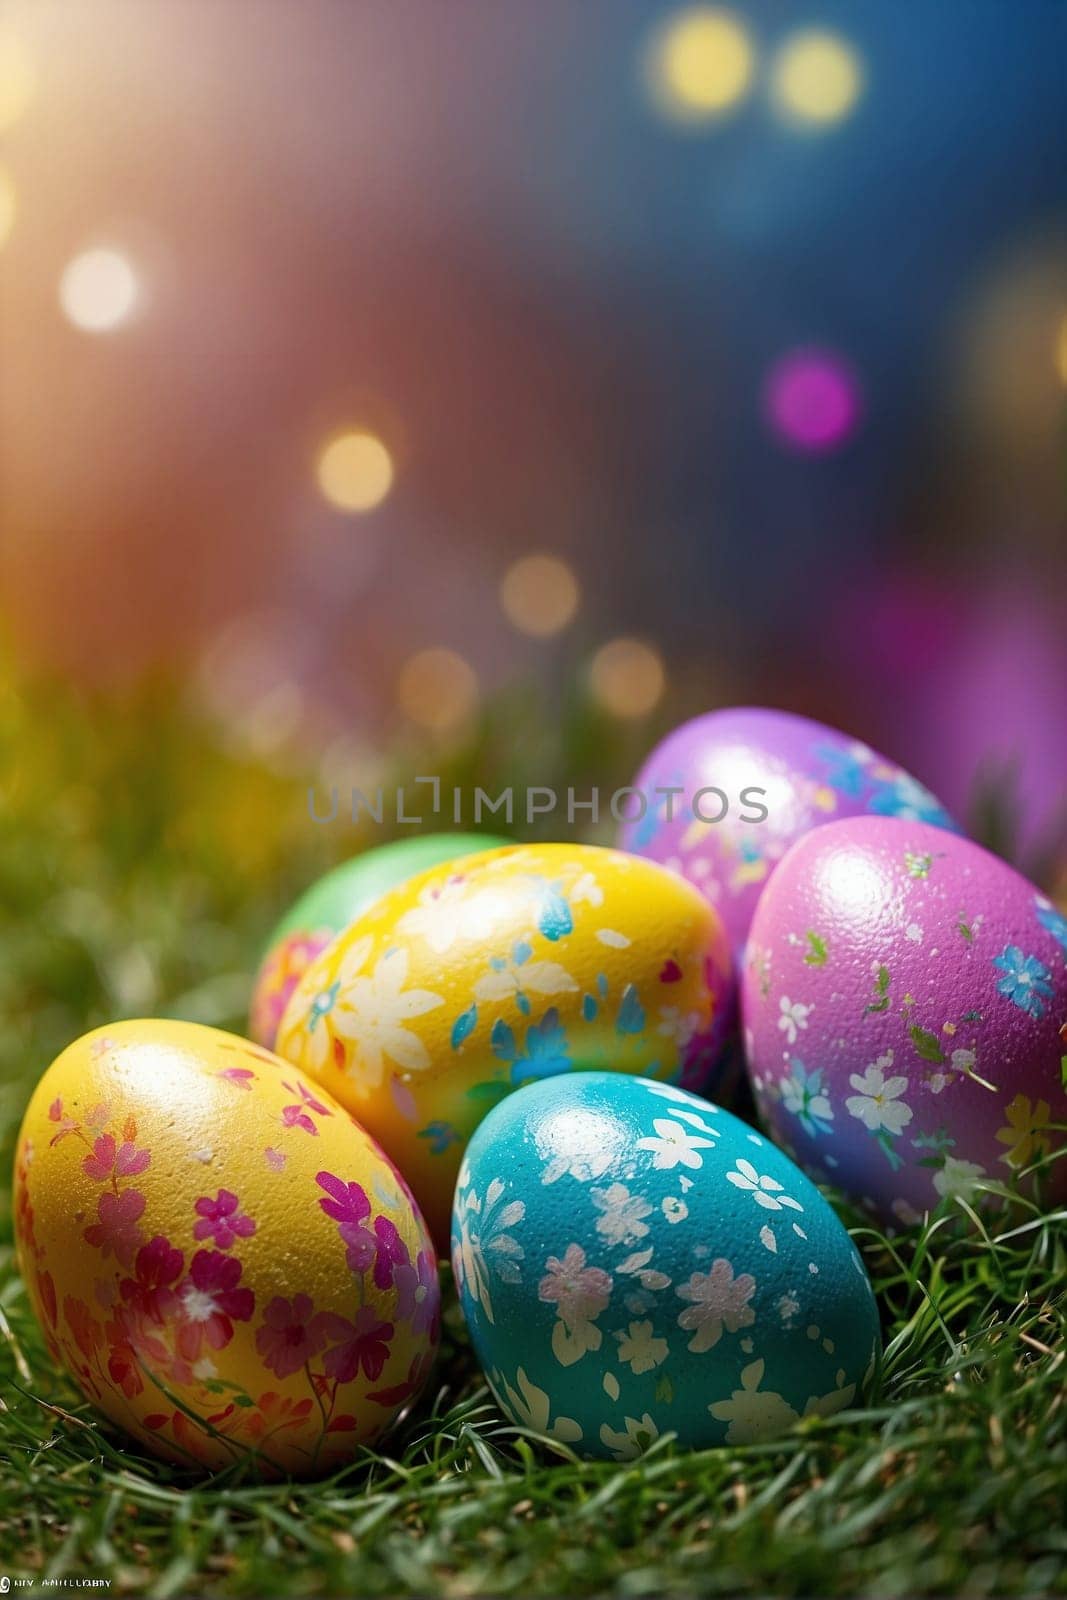 A vibrant group of eggs in various colors is placed on top of a lush green field.